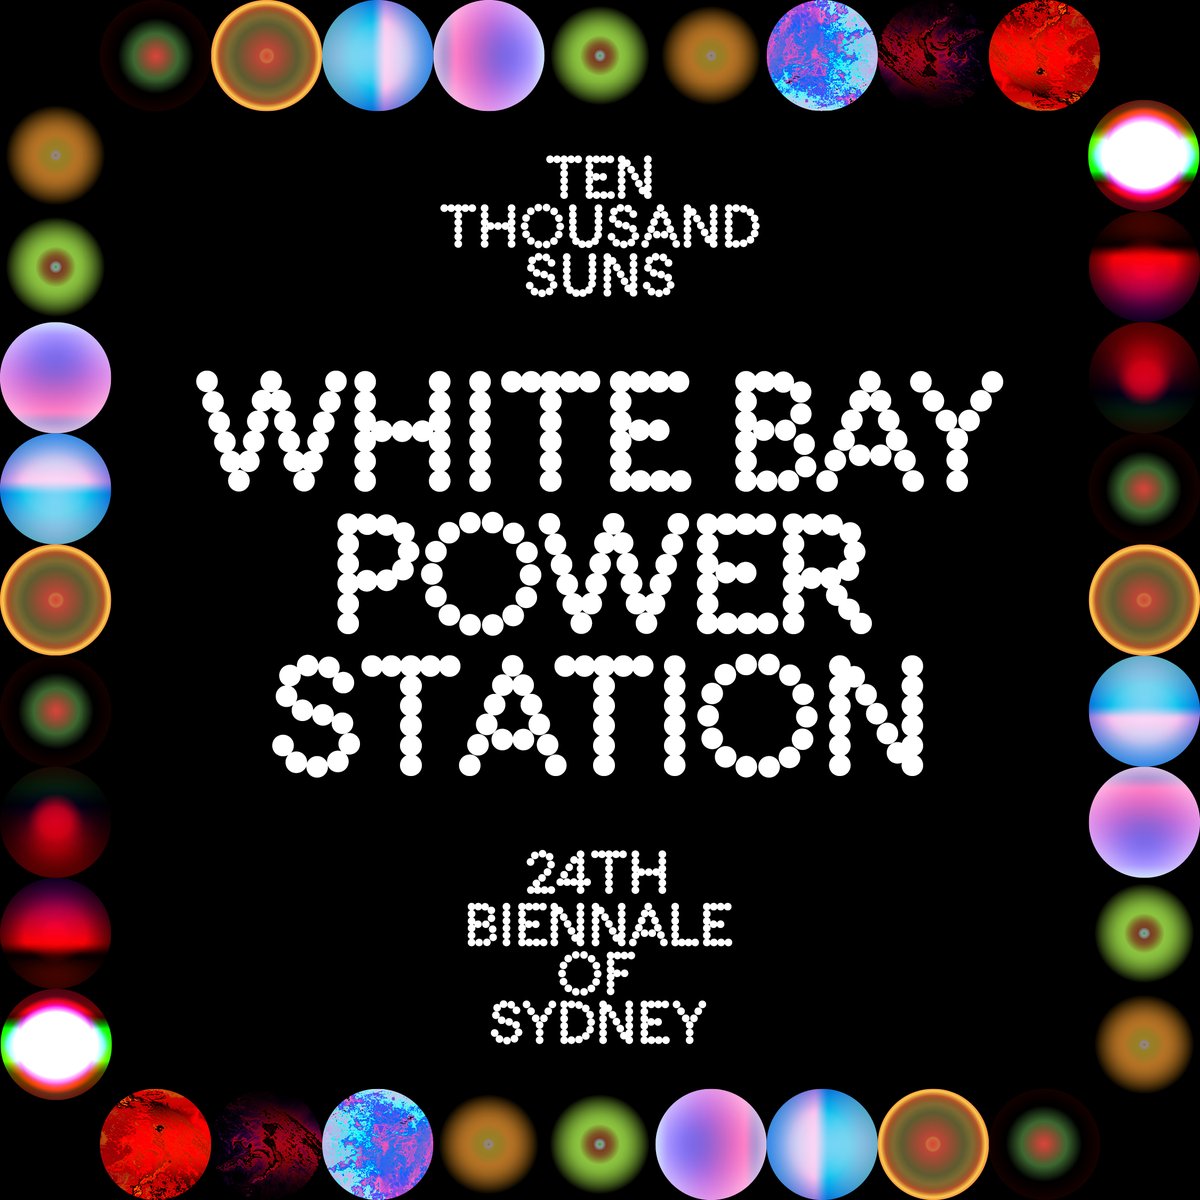 Our biggest secret! White Bay Power Station is the first location announced for Ten Thousand Suns, the 24th Biennale of Sydney. Find out more here: biennaleofsydney.art/ten-thousand-s…